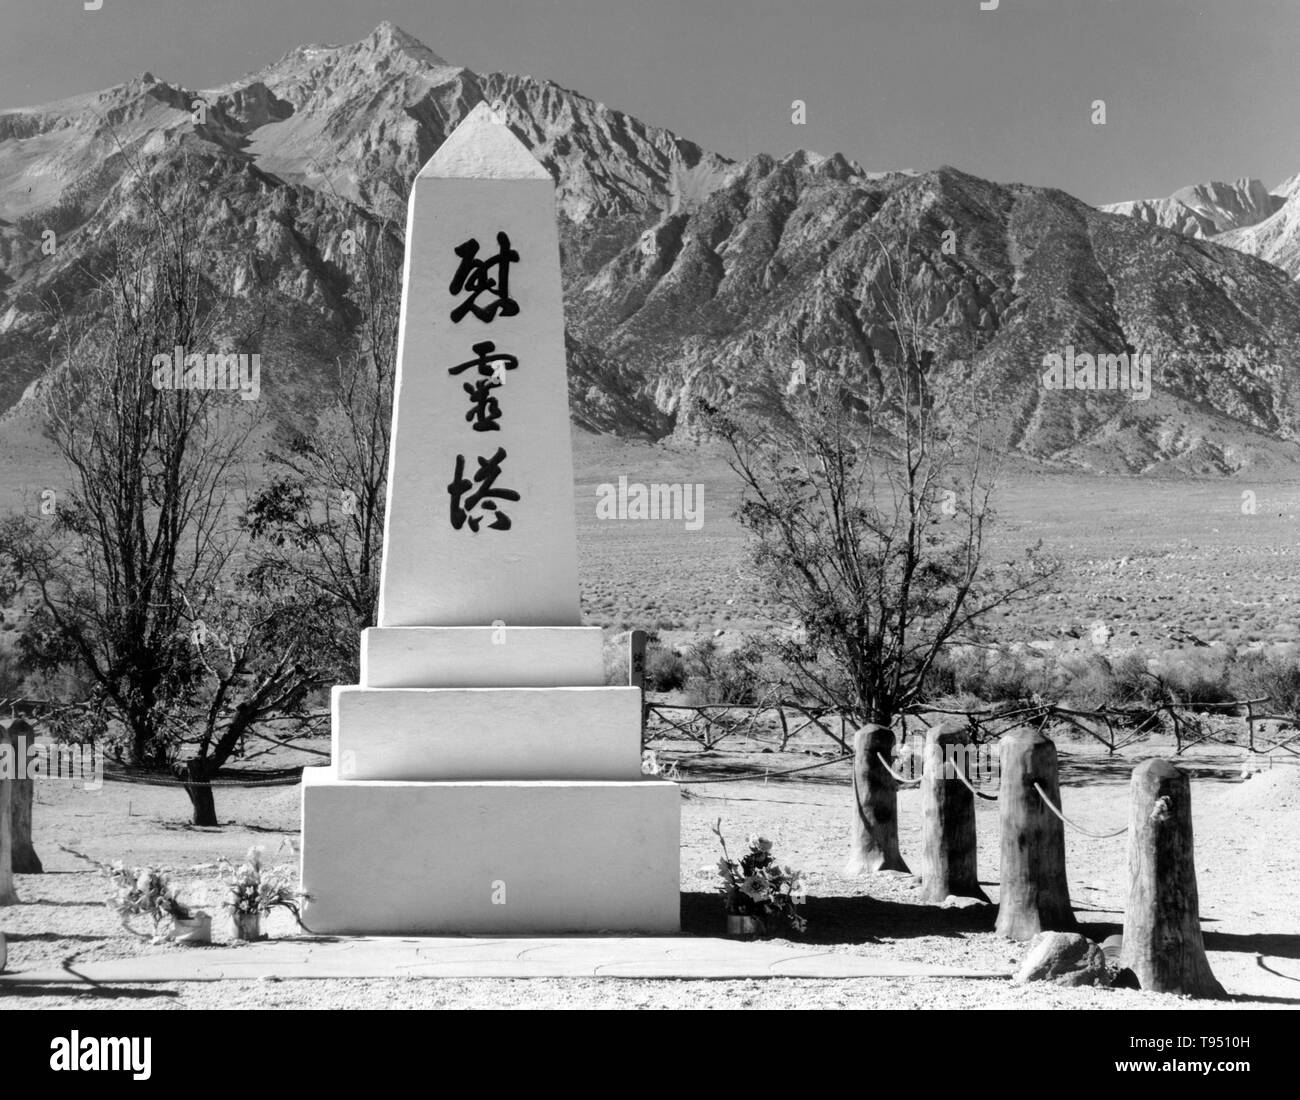 Entitled: 'Monument in cemetery, Manzanar Relocation Center, California. The internment of Japanese-Americans during WWII was the forced relocation and incarceration in camps of 110,000-120,000 people of Japanese ancestry (62% of the internees were US citizens) ordered by President Roosevelt shortly after Japan's attack on Pearl Harbor. Japanese-Americans were incarcerated based on local population concentrations and regional politics. Stock Photo